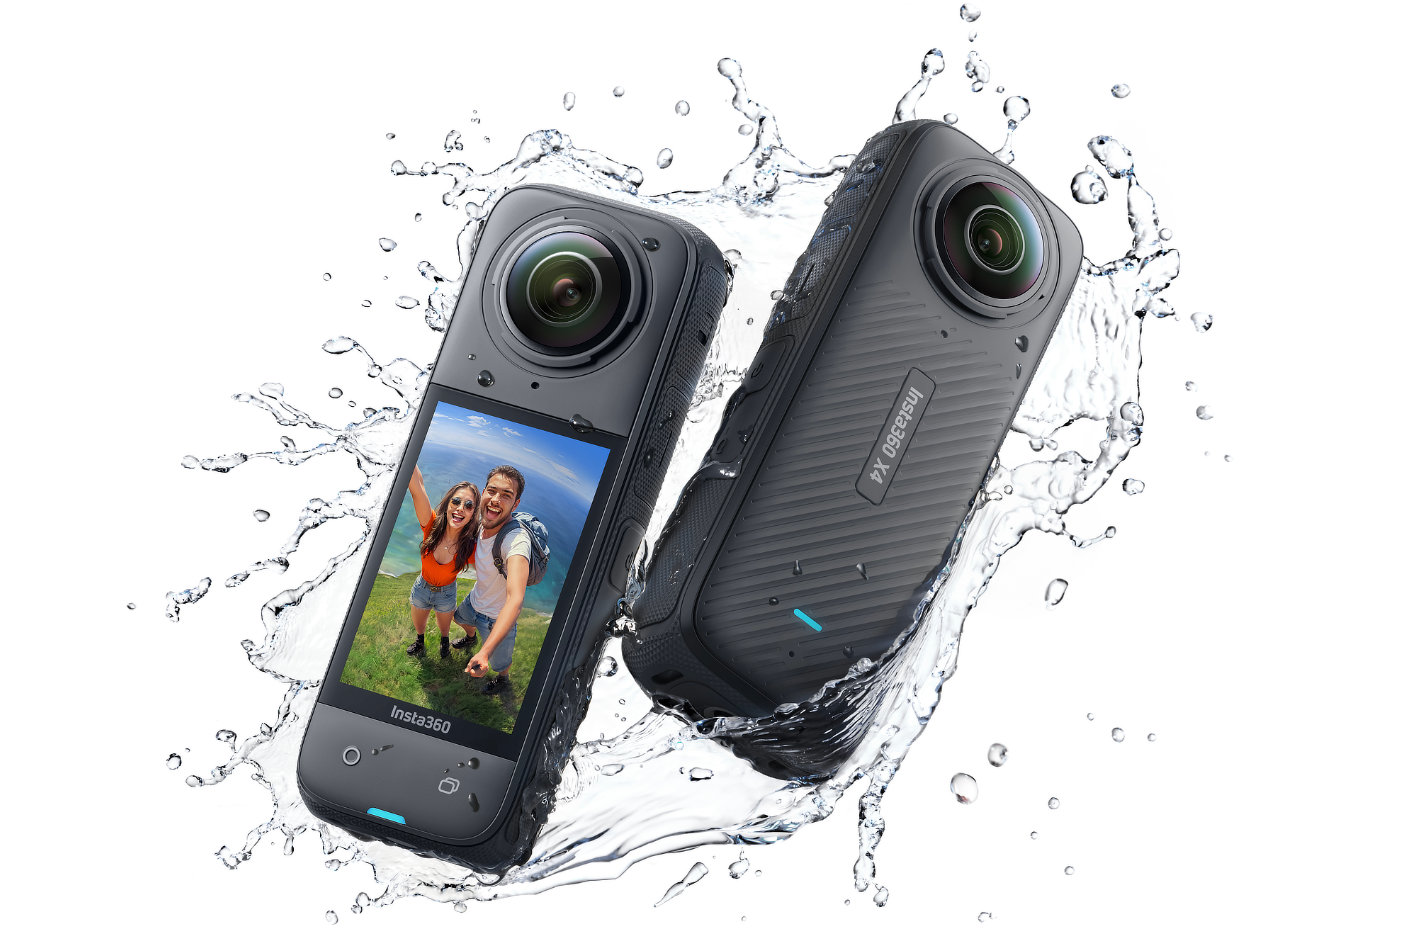 The new action cam flagship: Insta360 X4 with 8K 360° video 30